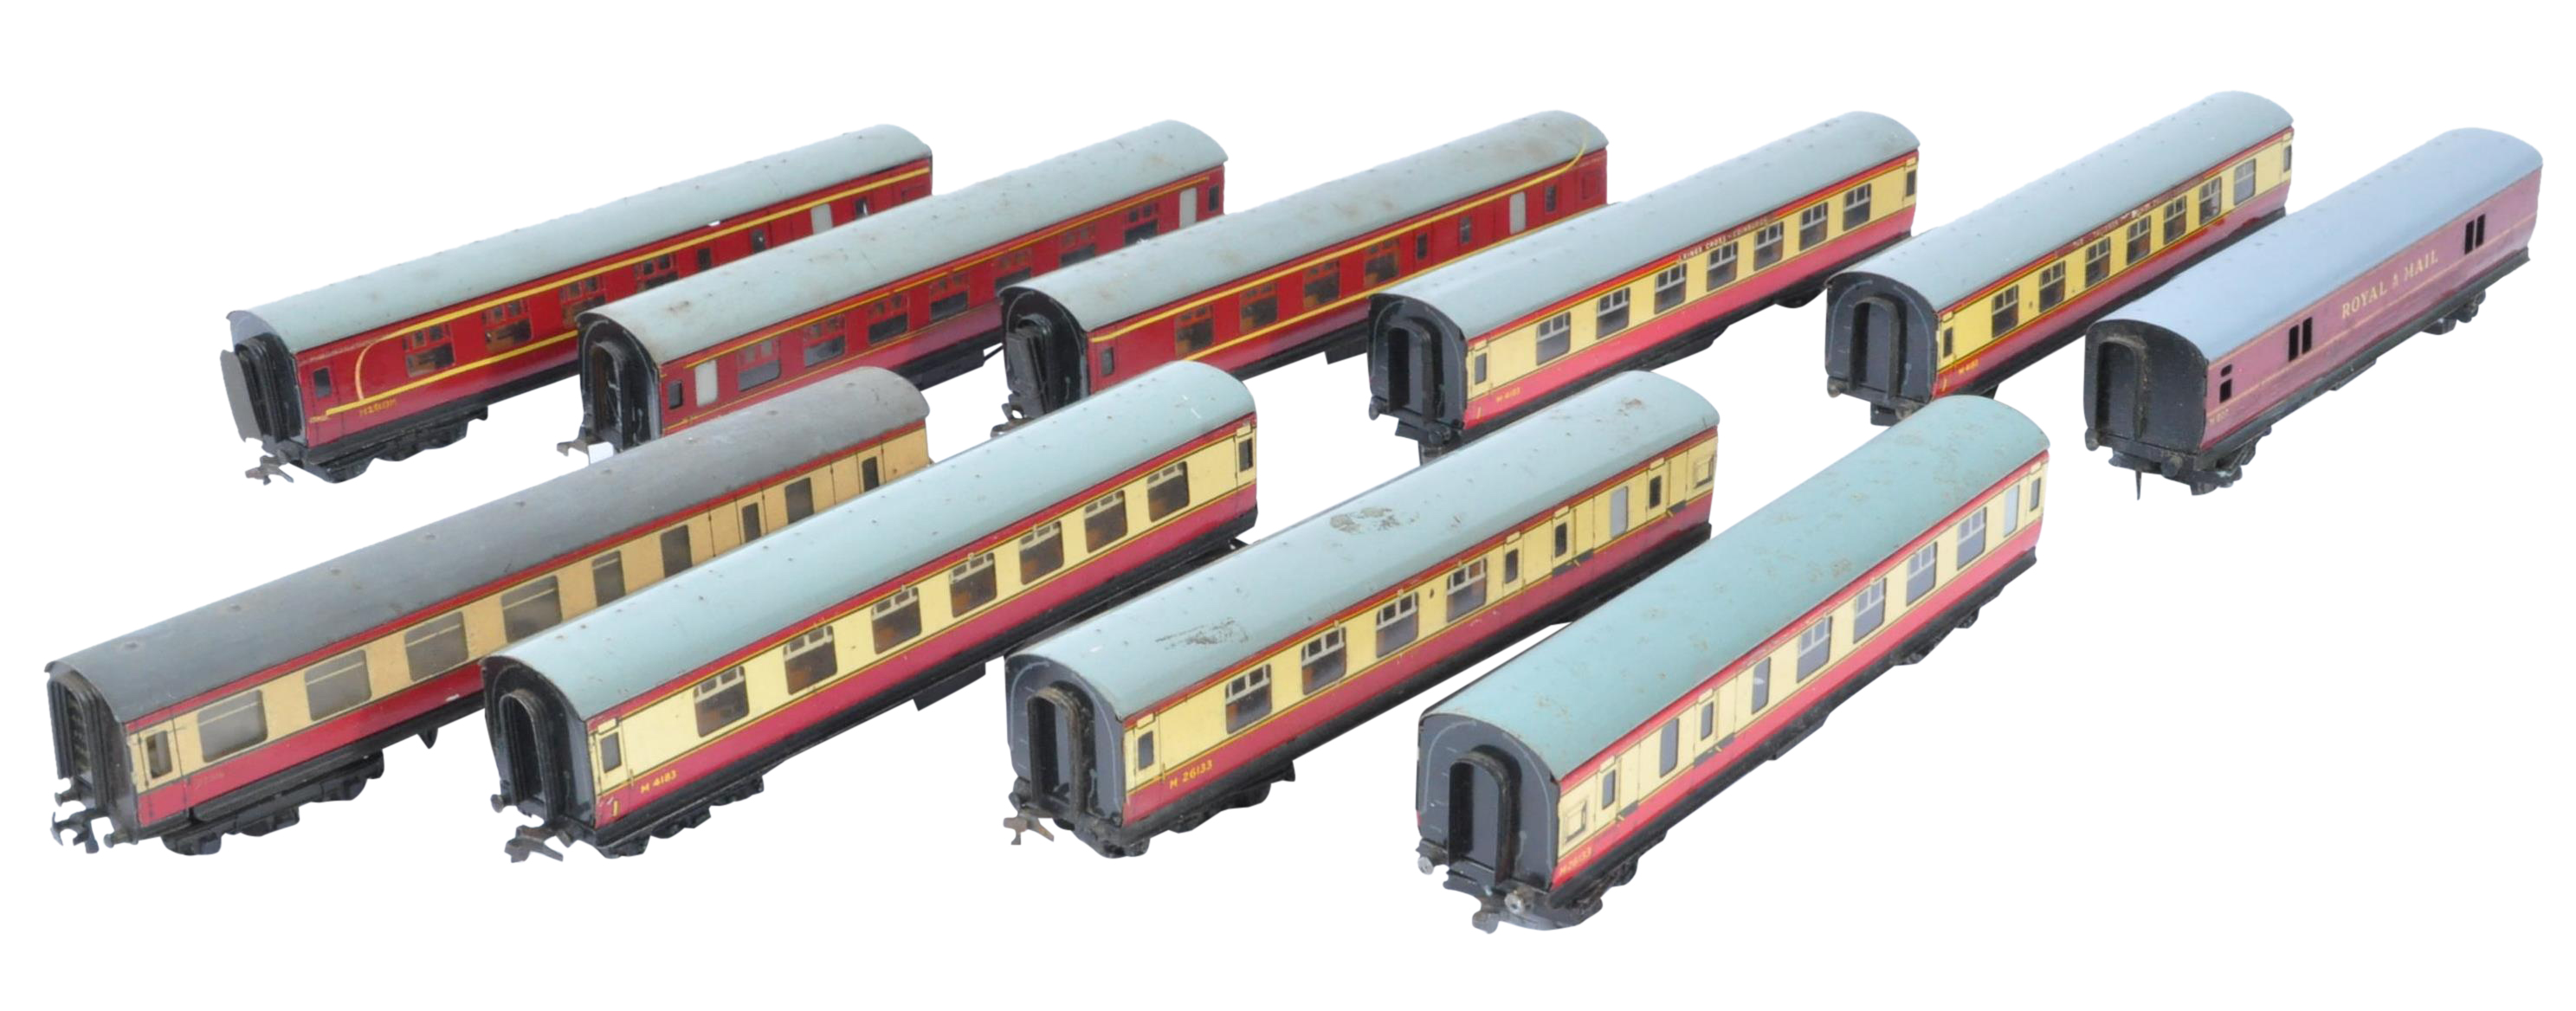 COLLECTION OF HORNBY DUBLO MODEL RAILWAY TRAINSET CARRIAGES